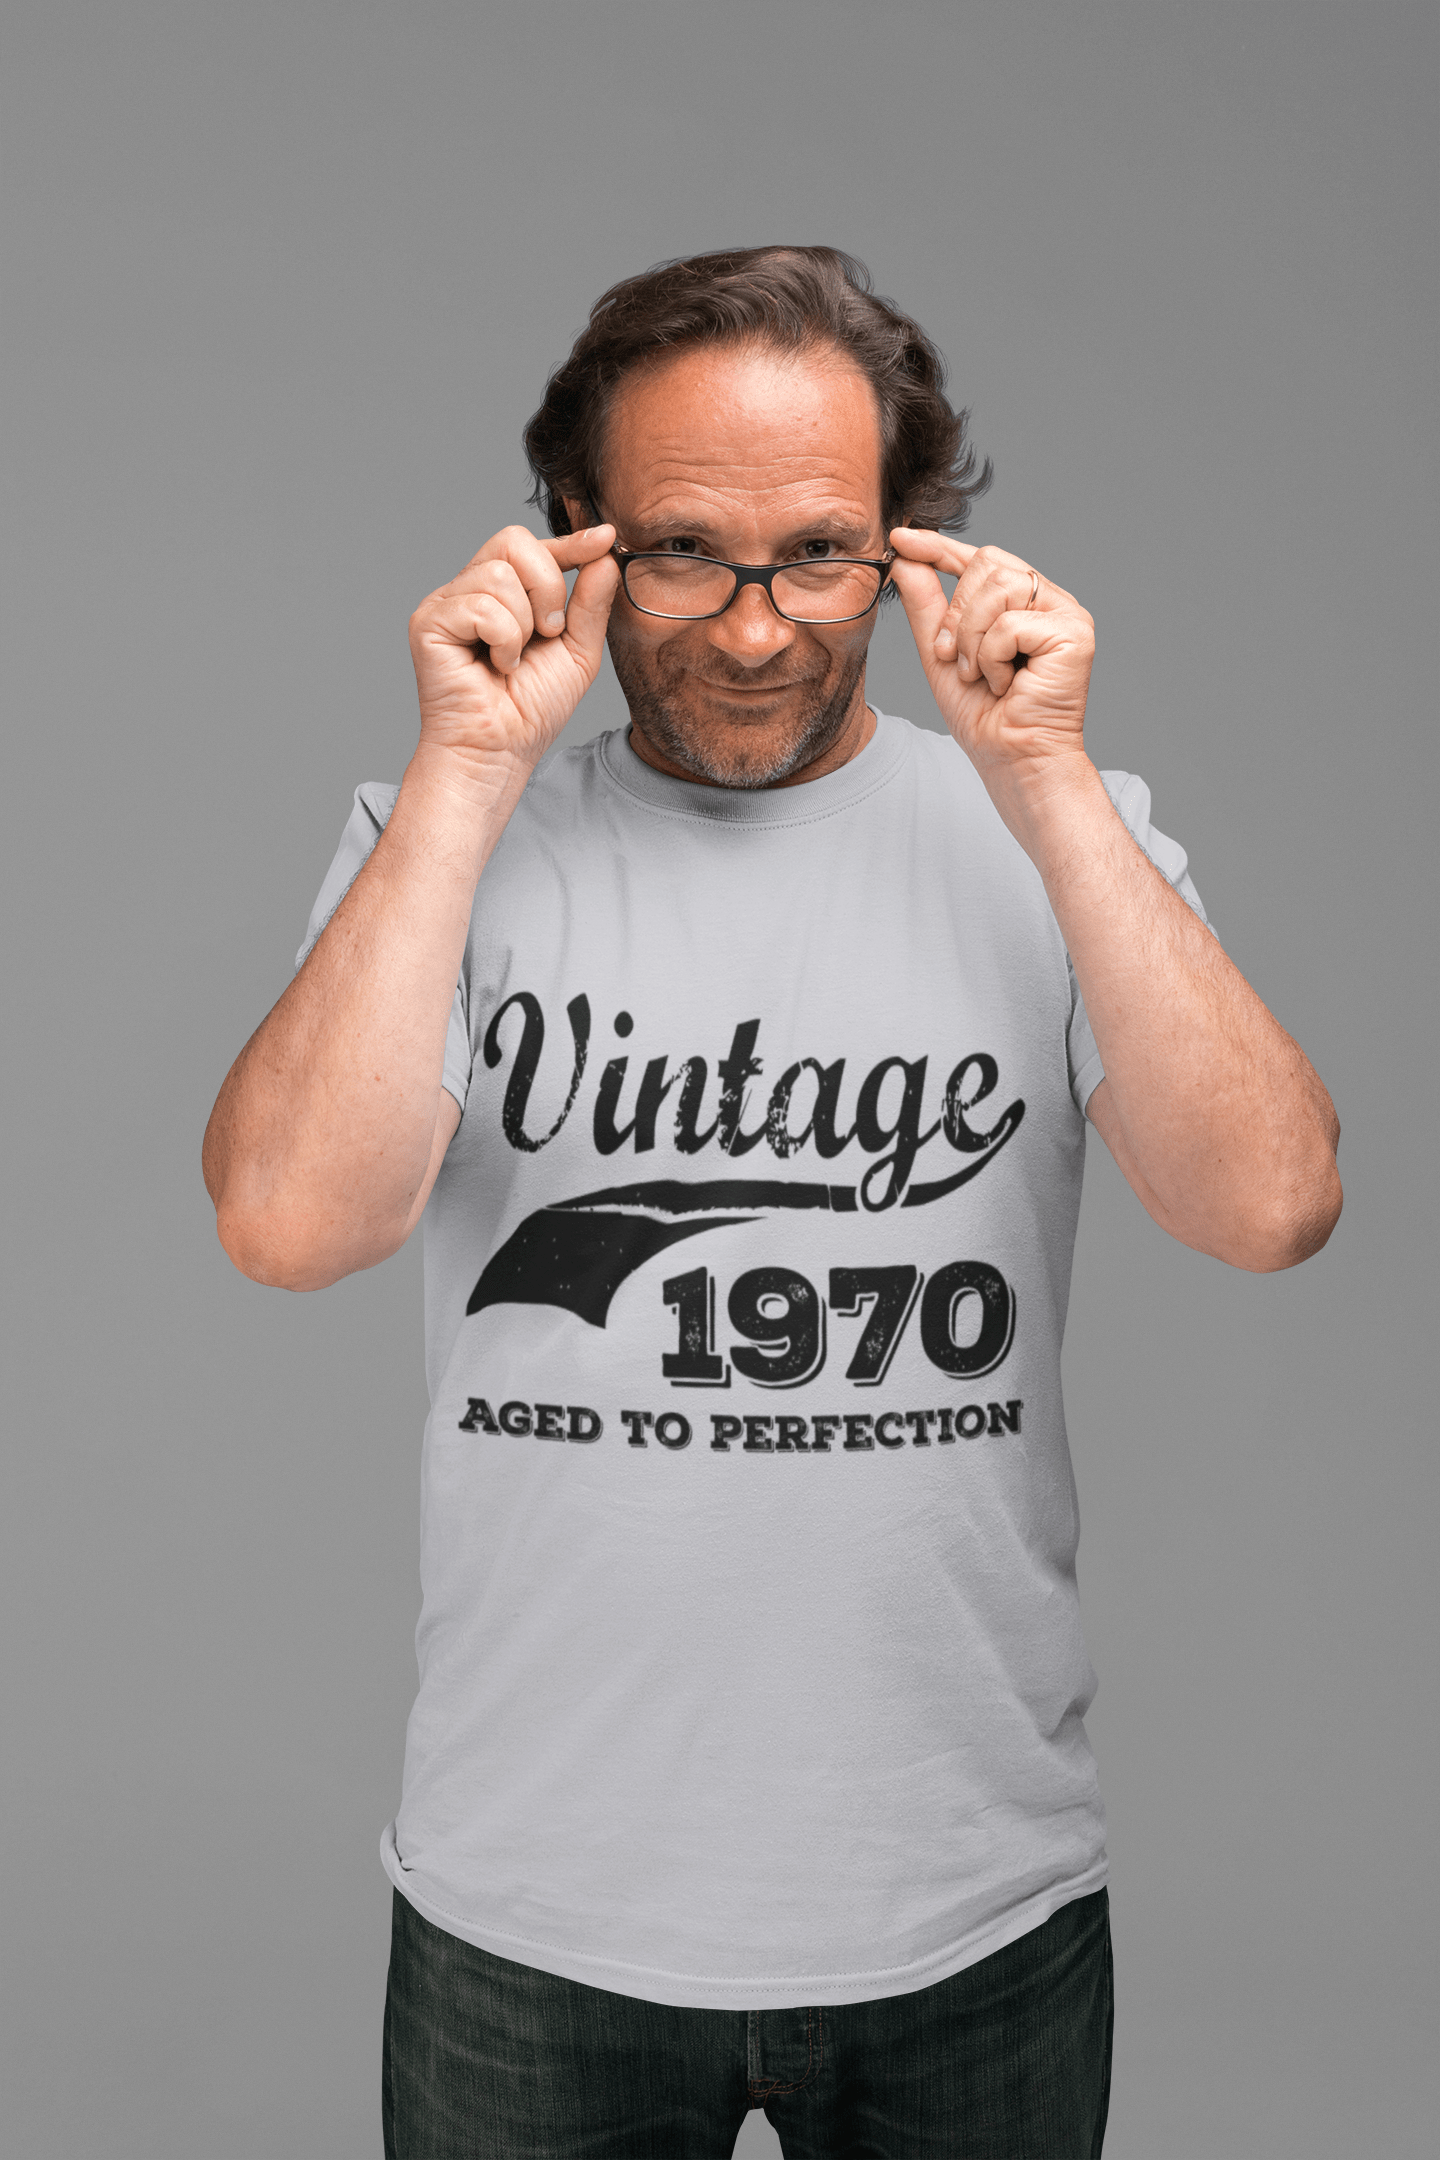 Vintage Aged to Perfection 1970, Grey, Men's Short Sleeve Round Neck T-shirt, gift t-shirt 00346